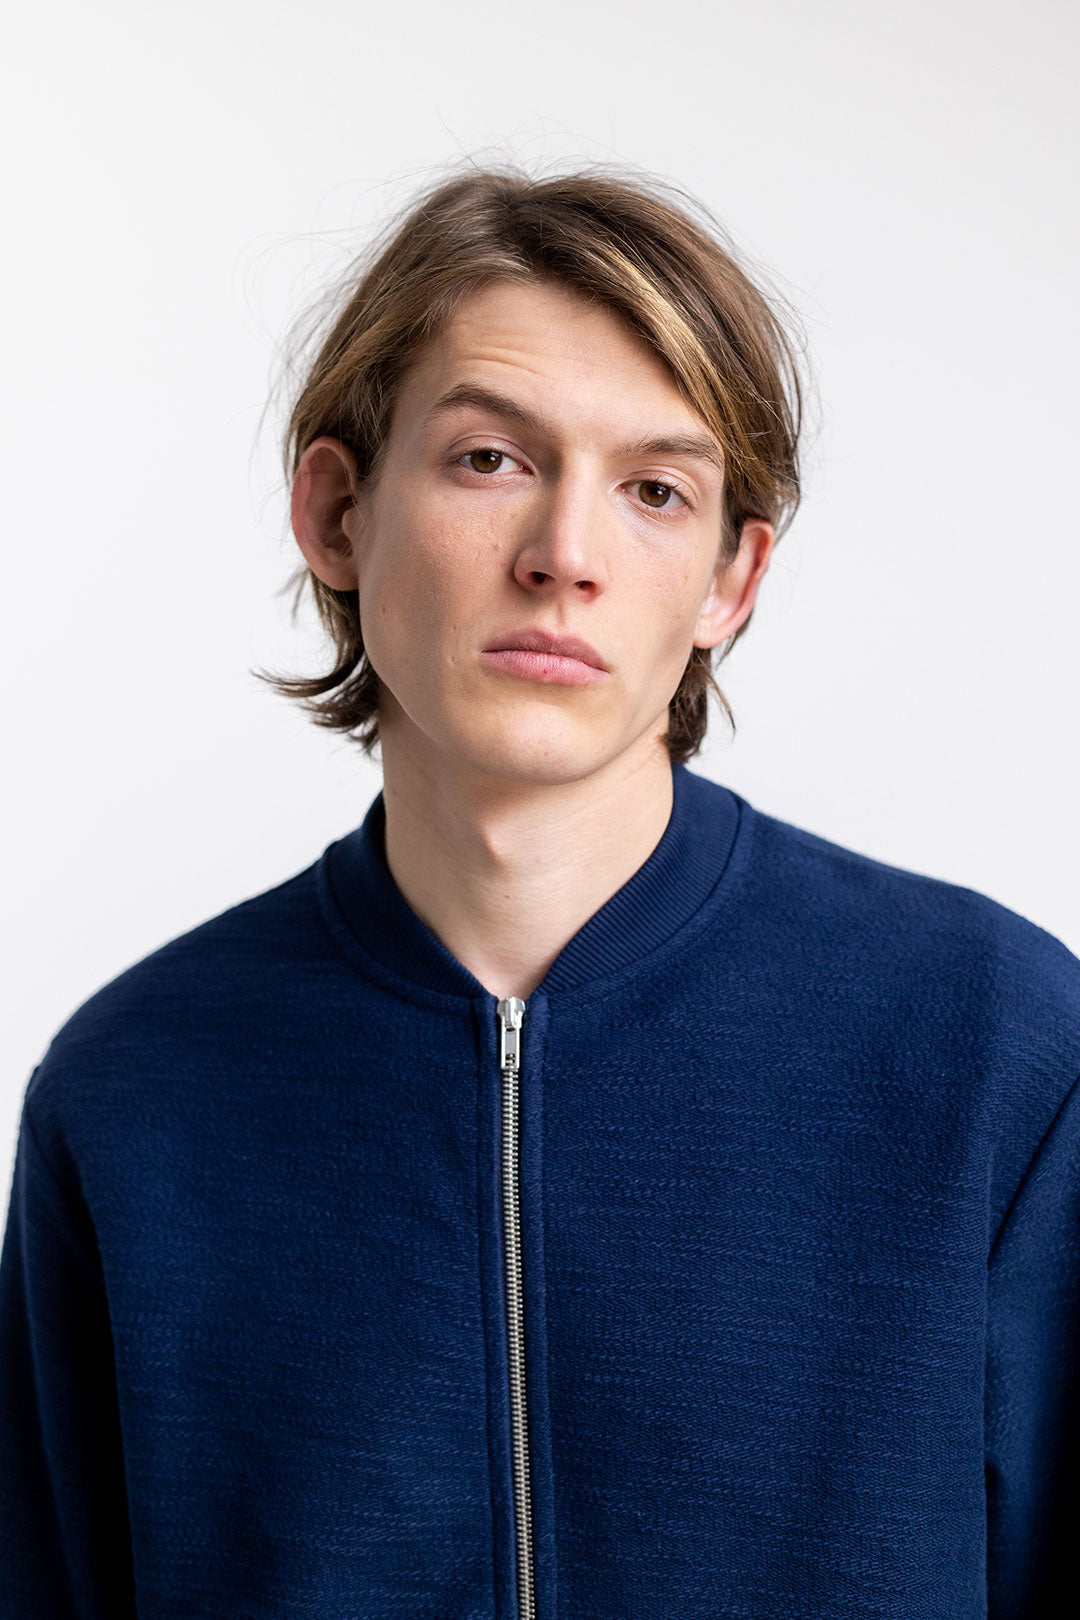 Dark blue bomber jacket made from 100% organic cotton from Rotholz